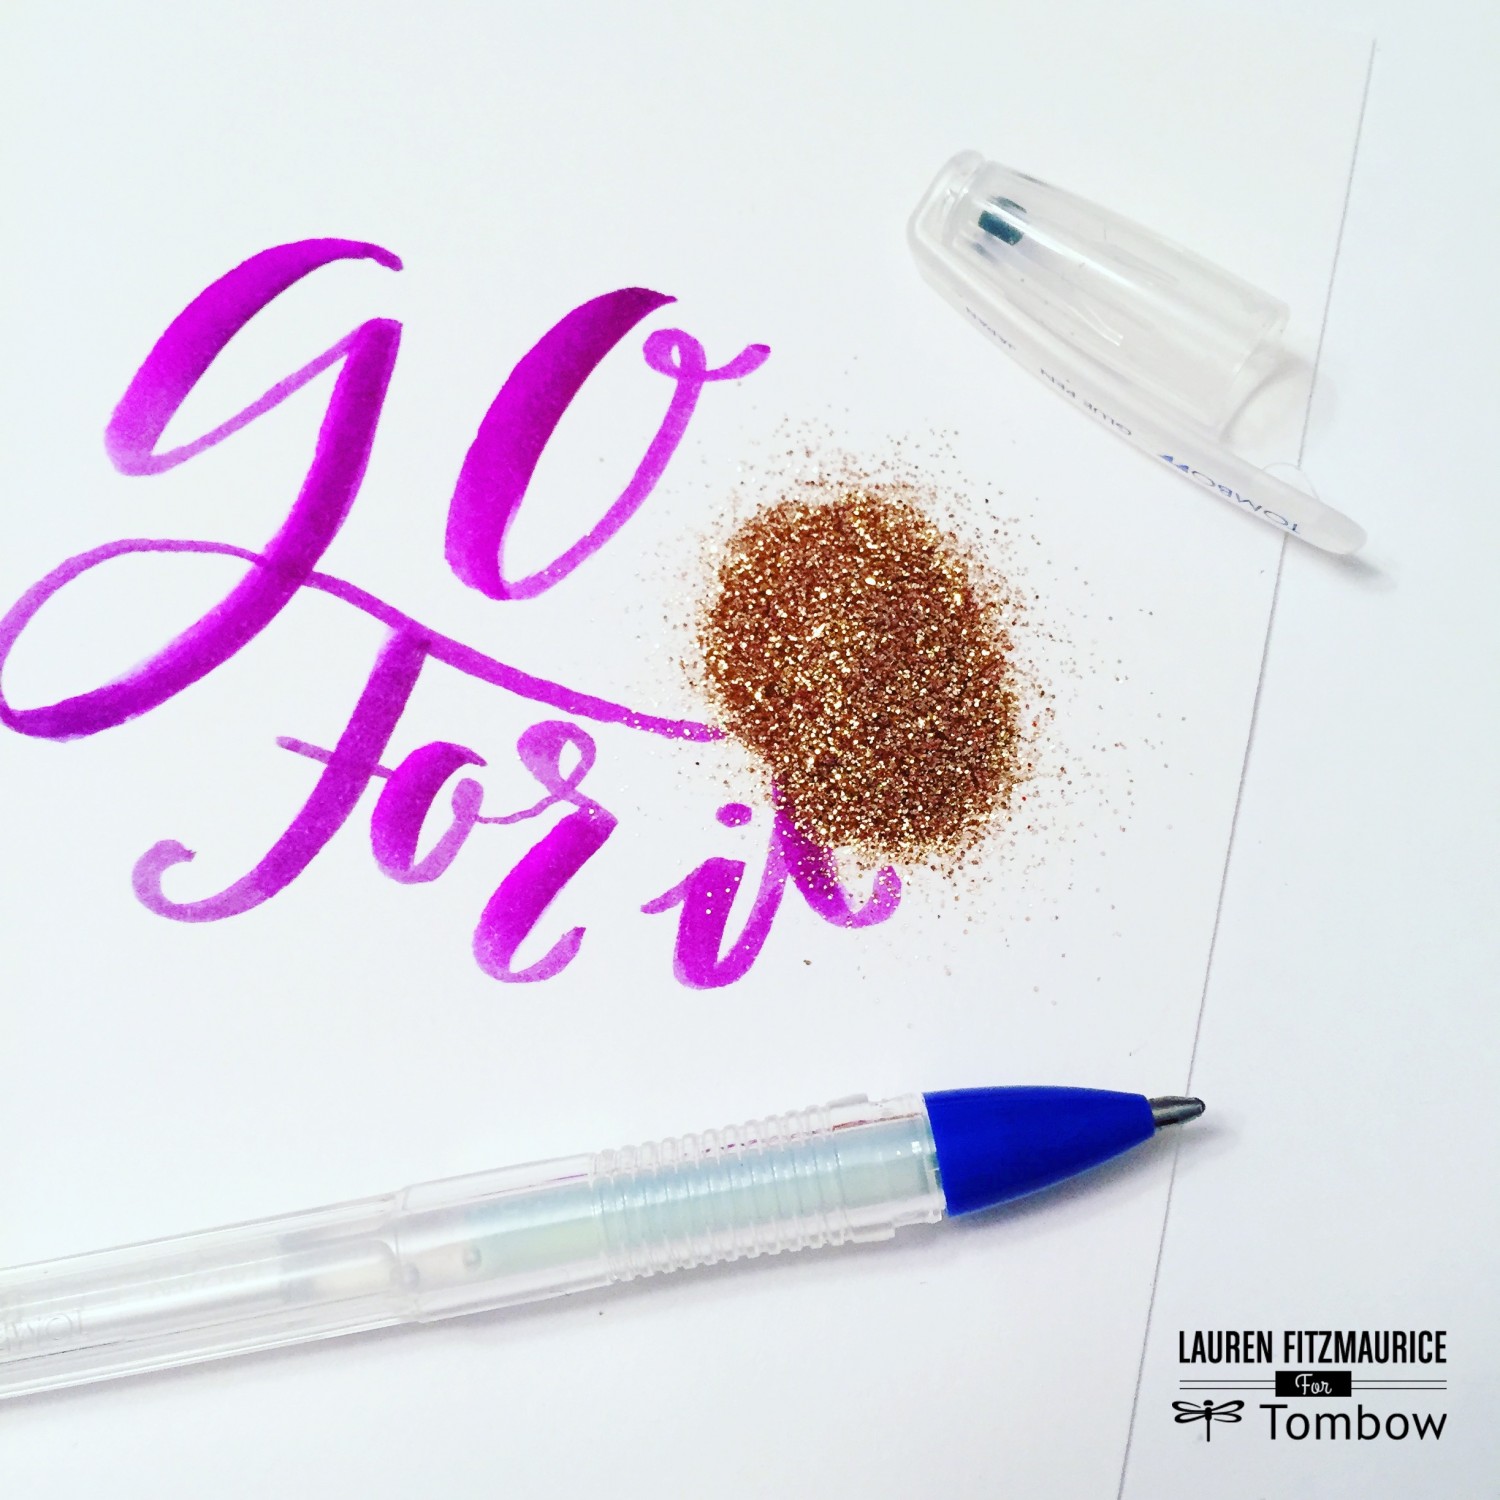 Top 10 tools every letterer needs: Tombow MONO Glue Pen